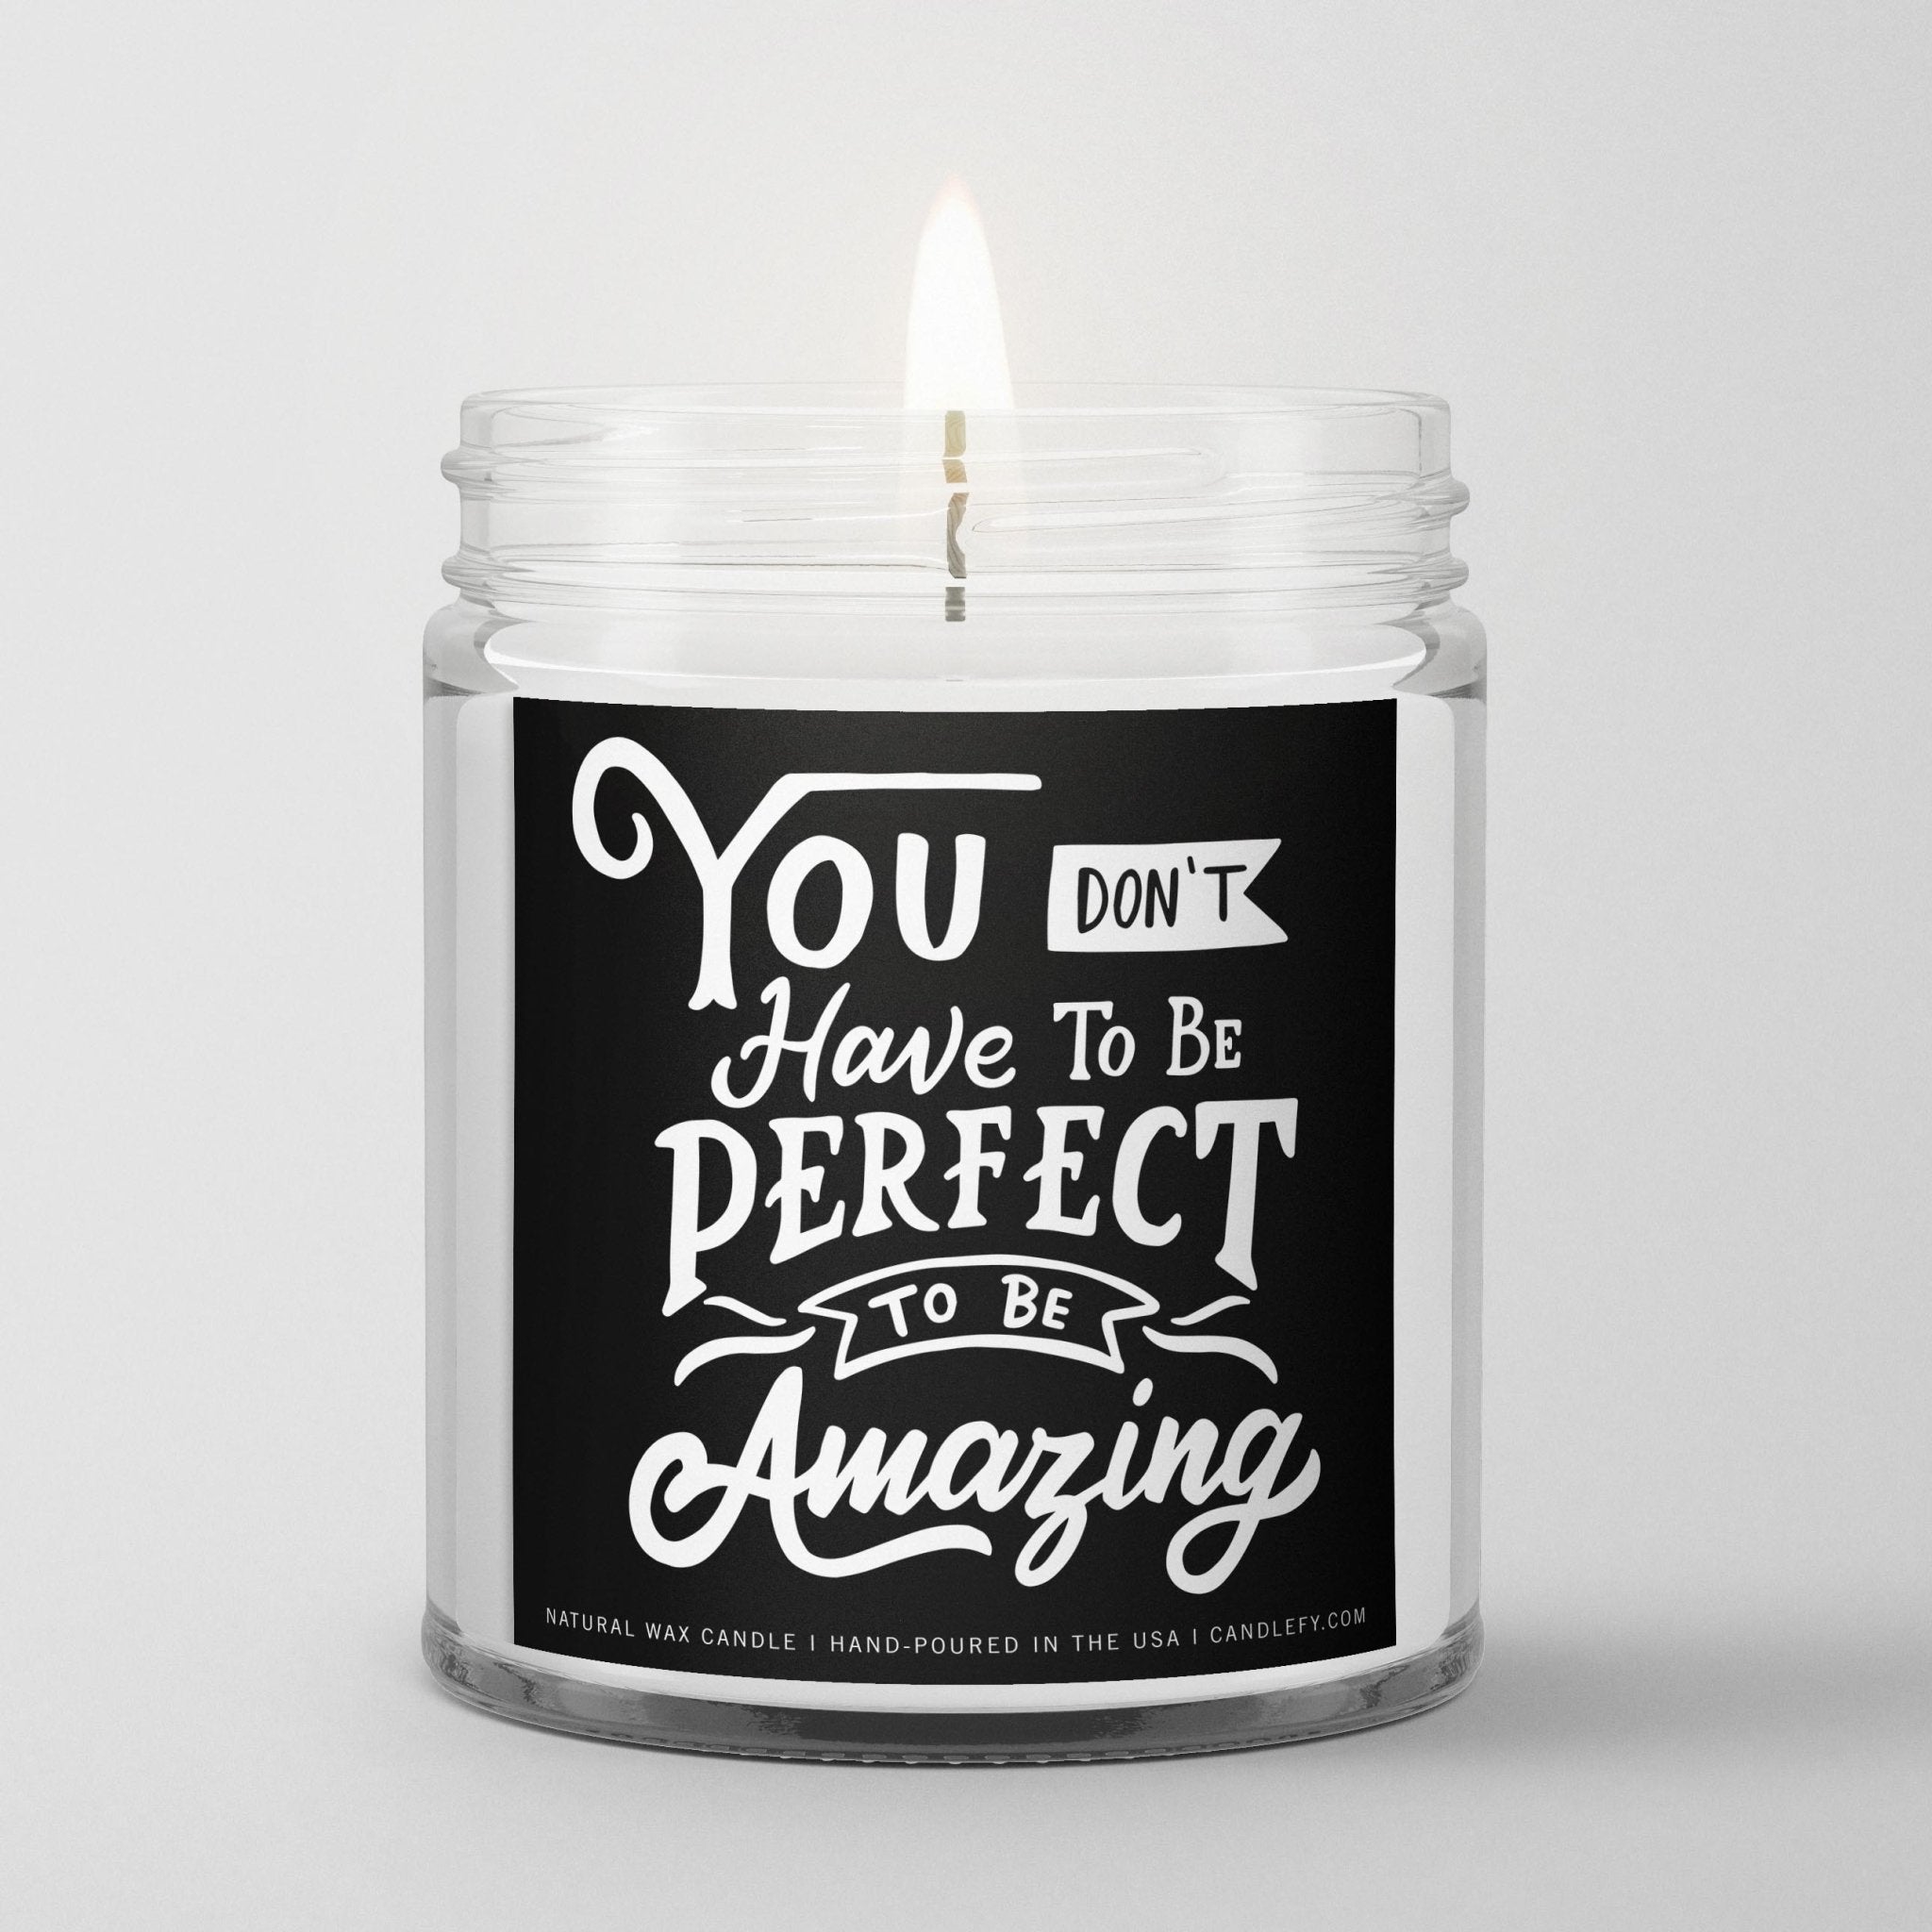 Inspirational Quote Candle "You don't have to be perfect to be amazing" - Candlefy